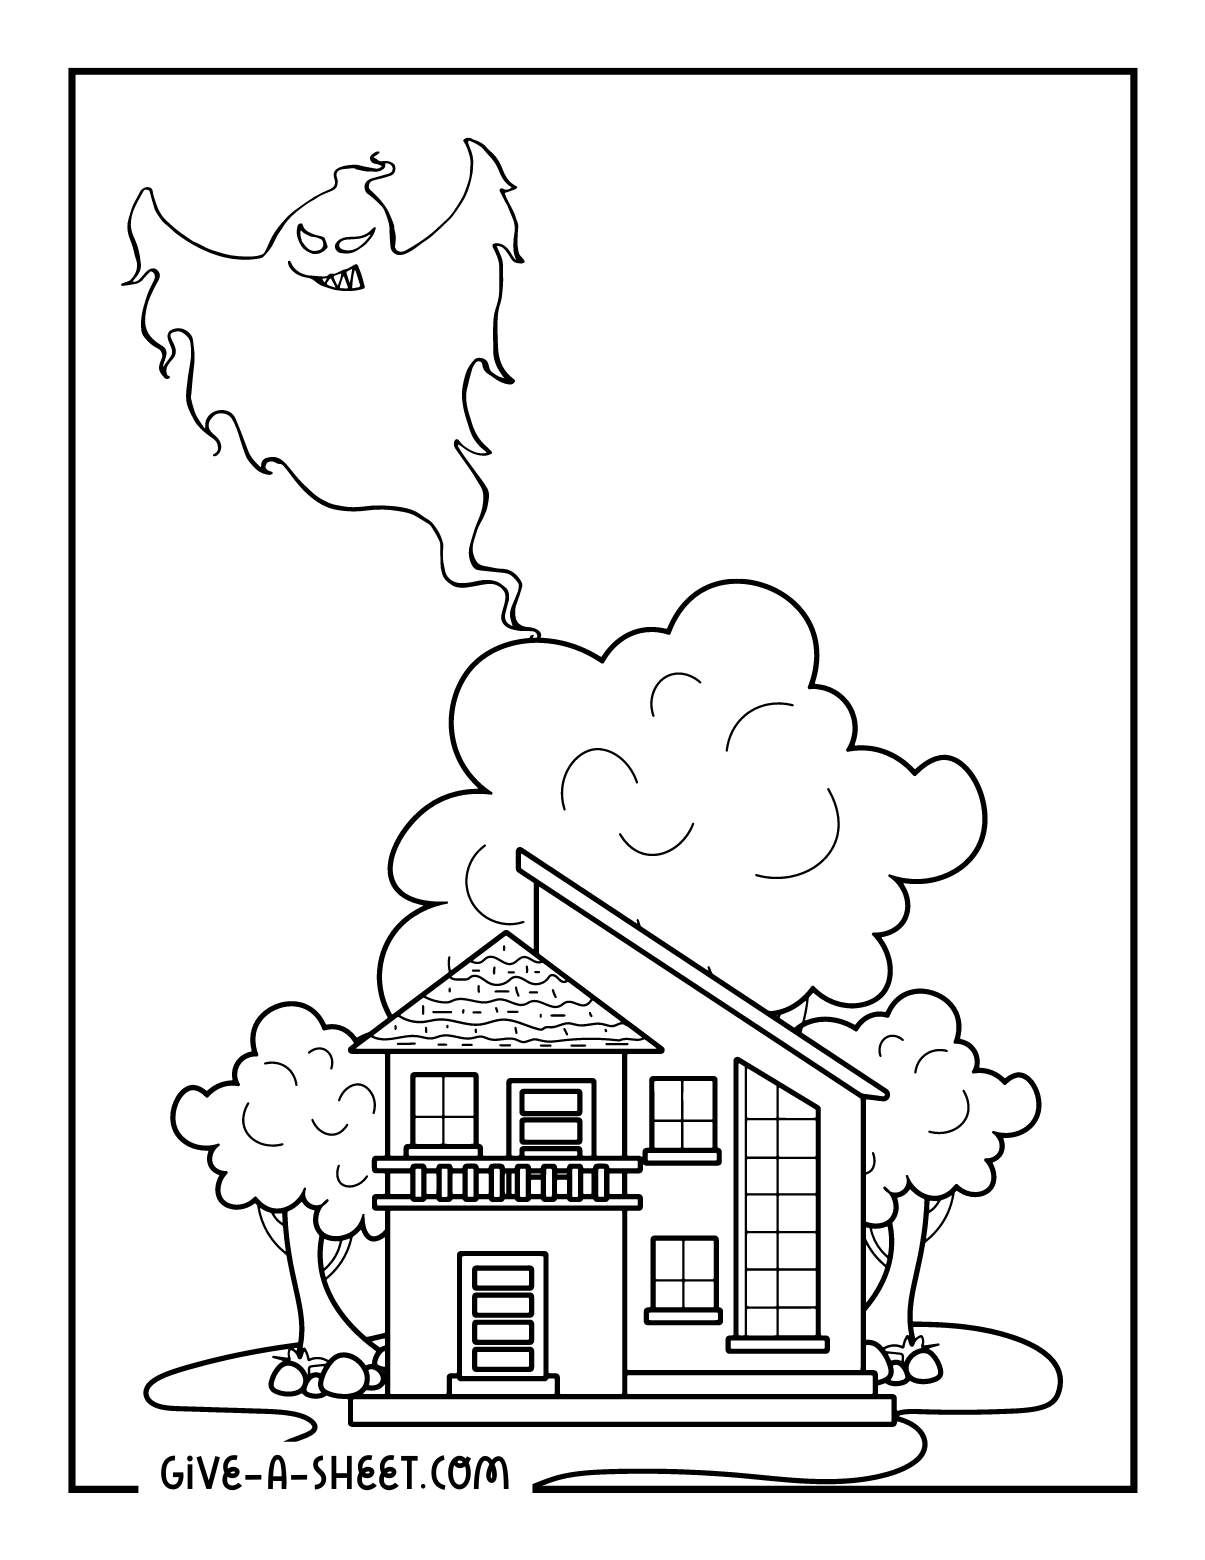 Scary ghosts halloween haunted houses coloring sheet.